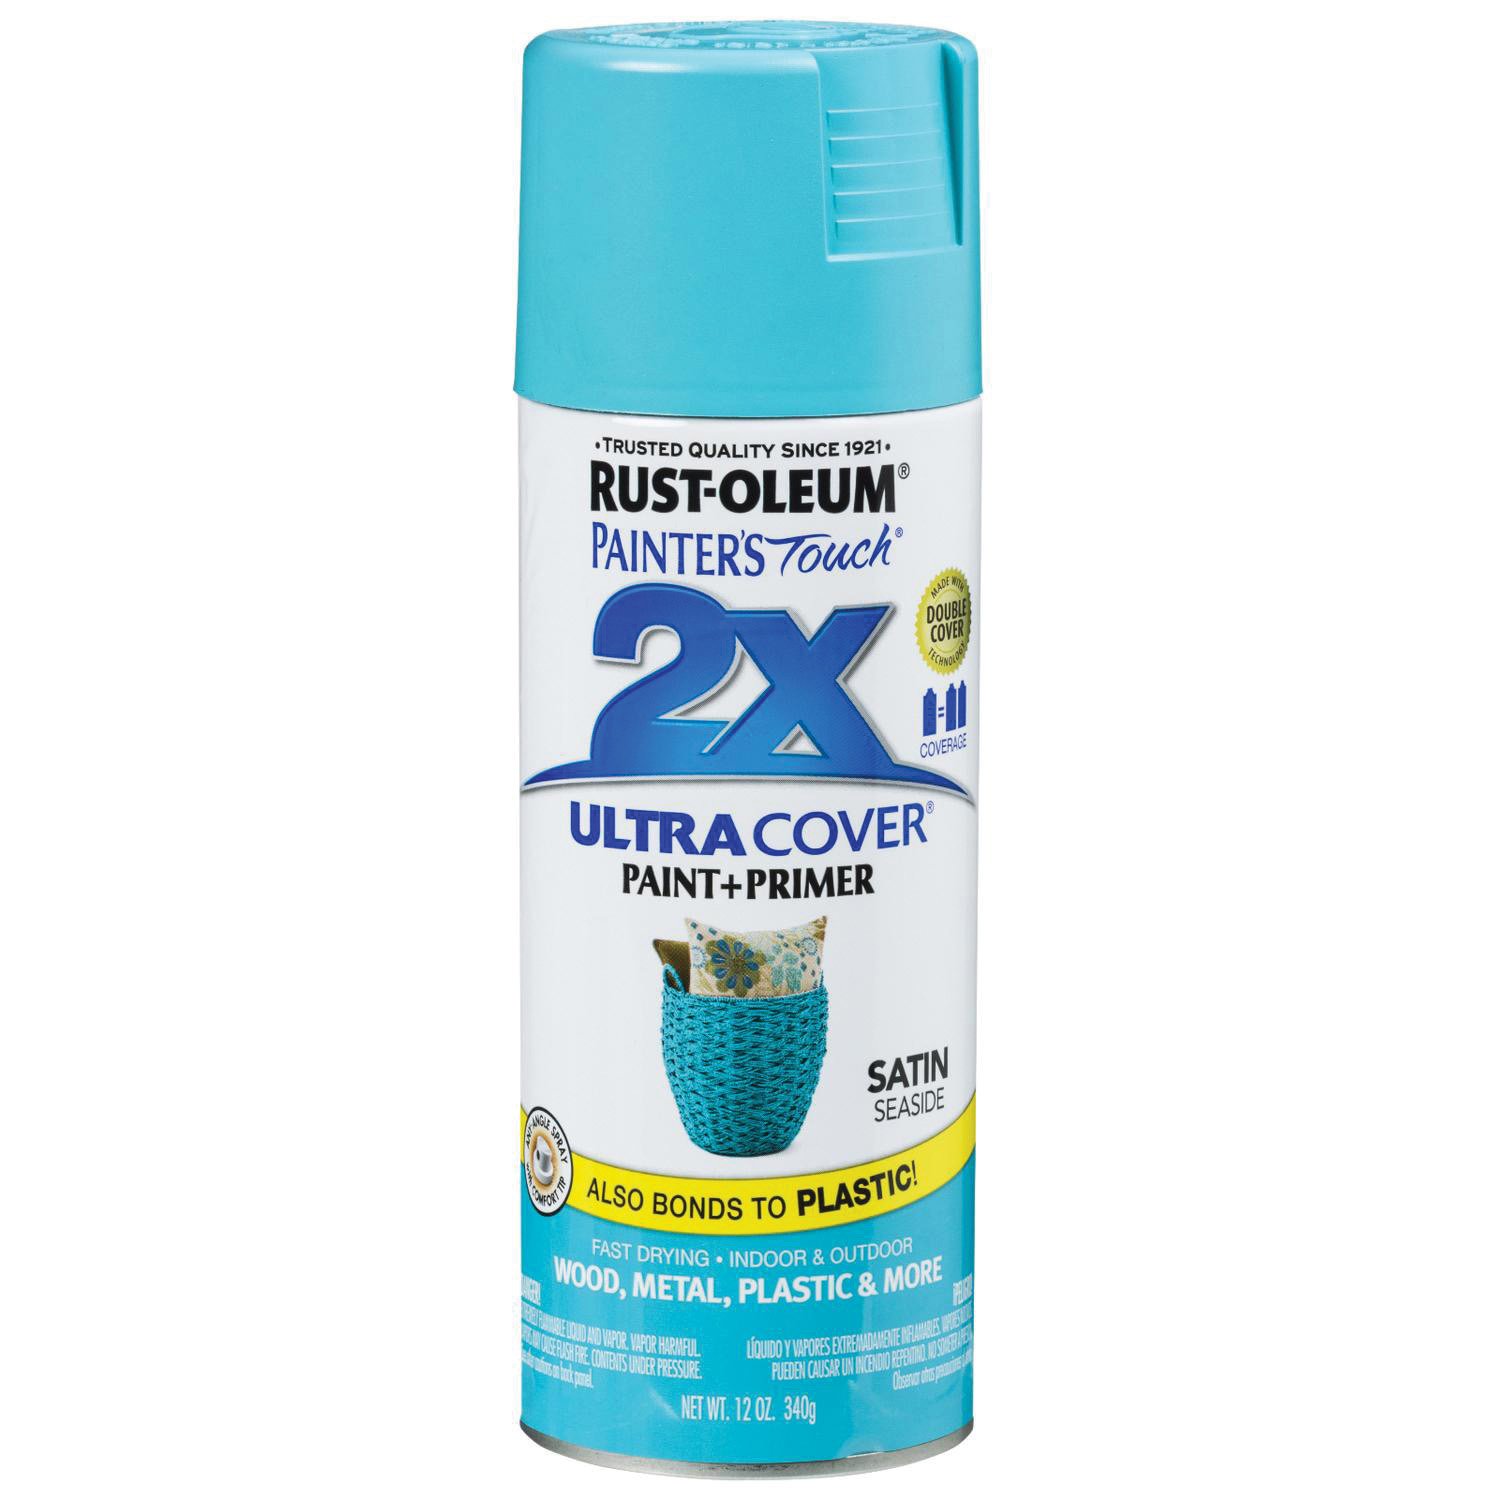 RUSTOLEUM PAINTER'S Touch 2X ULTRA COVER 315395 Spray Paint, 12 oz Aerosol Can, Satin, Seaside